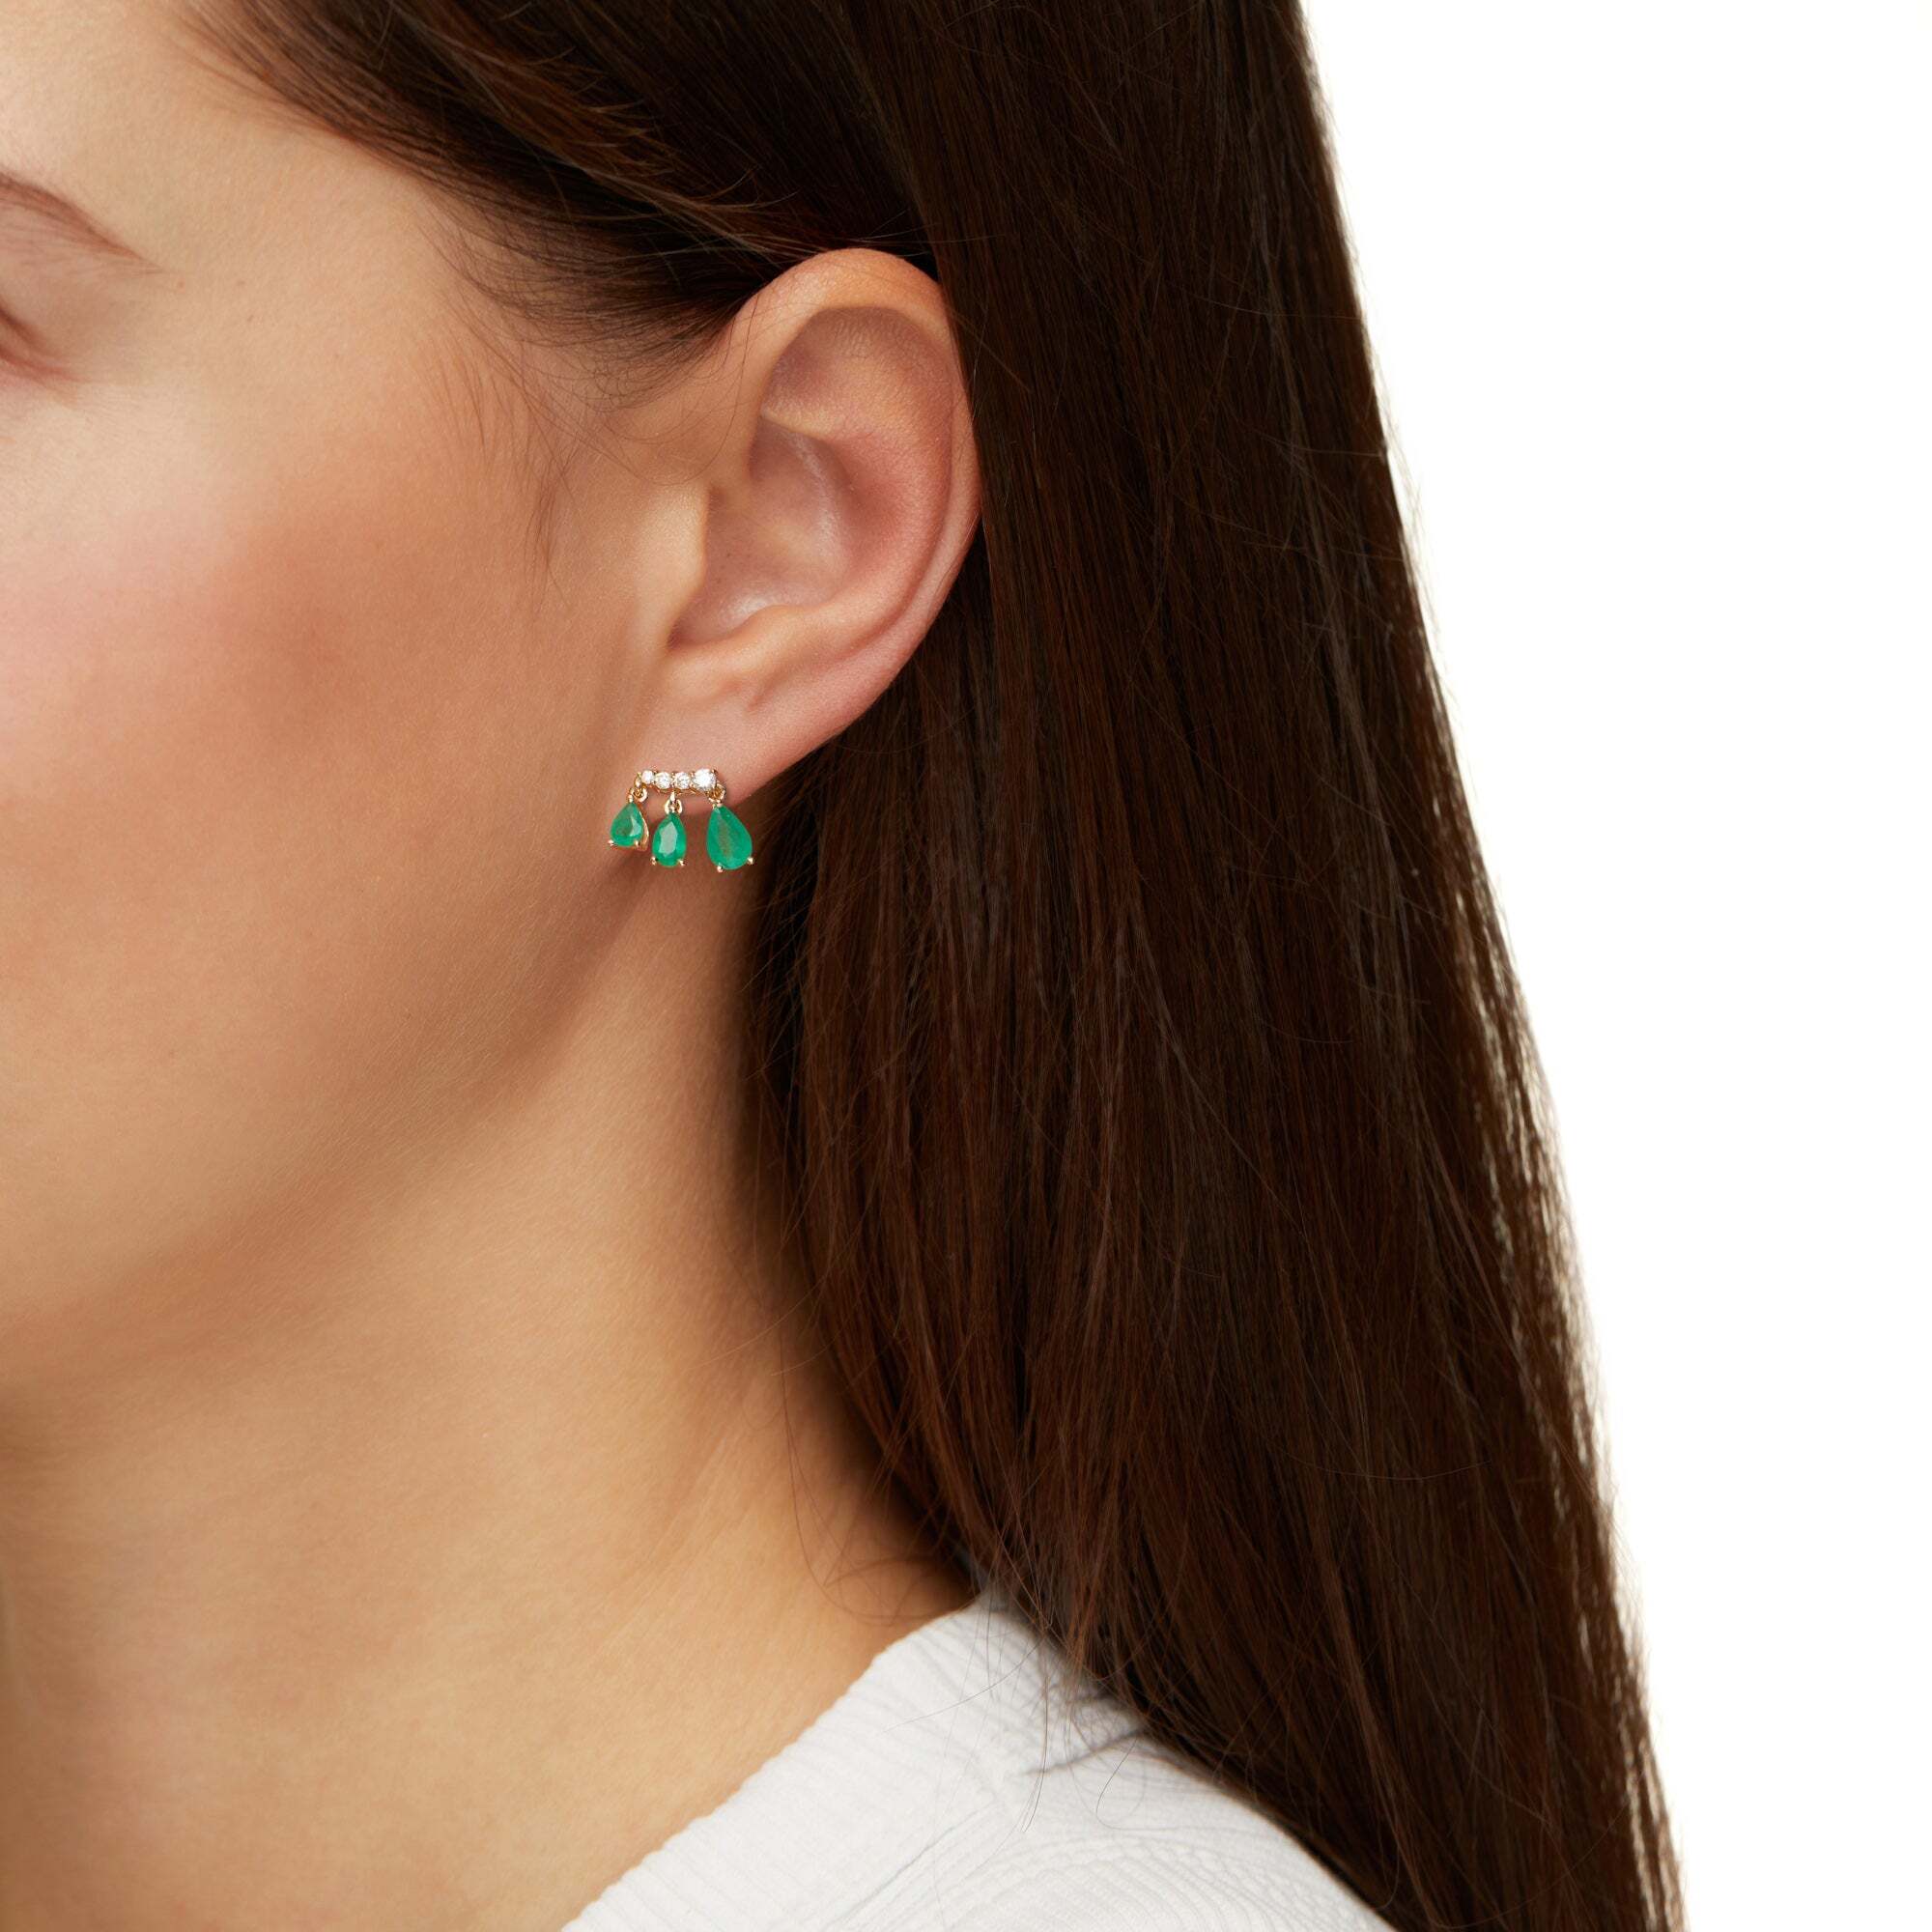 Emerald Drops Earring with Brilliants